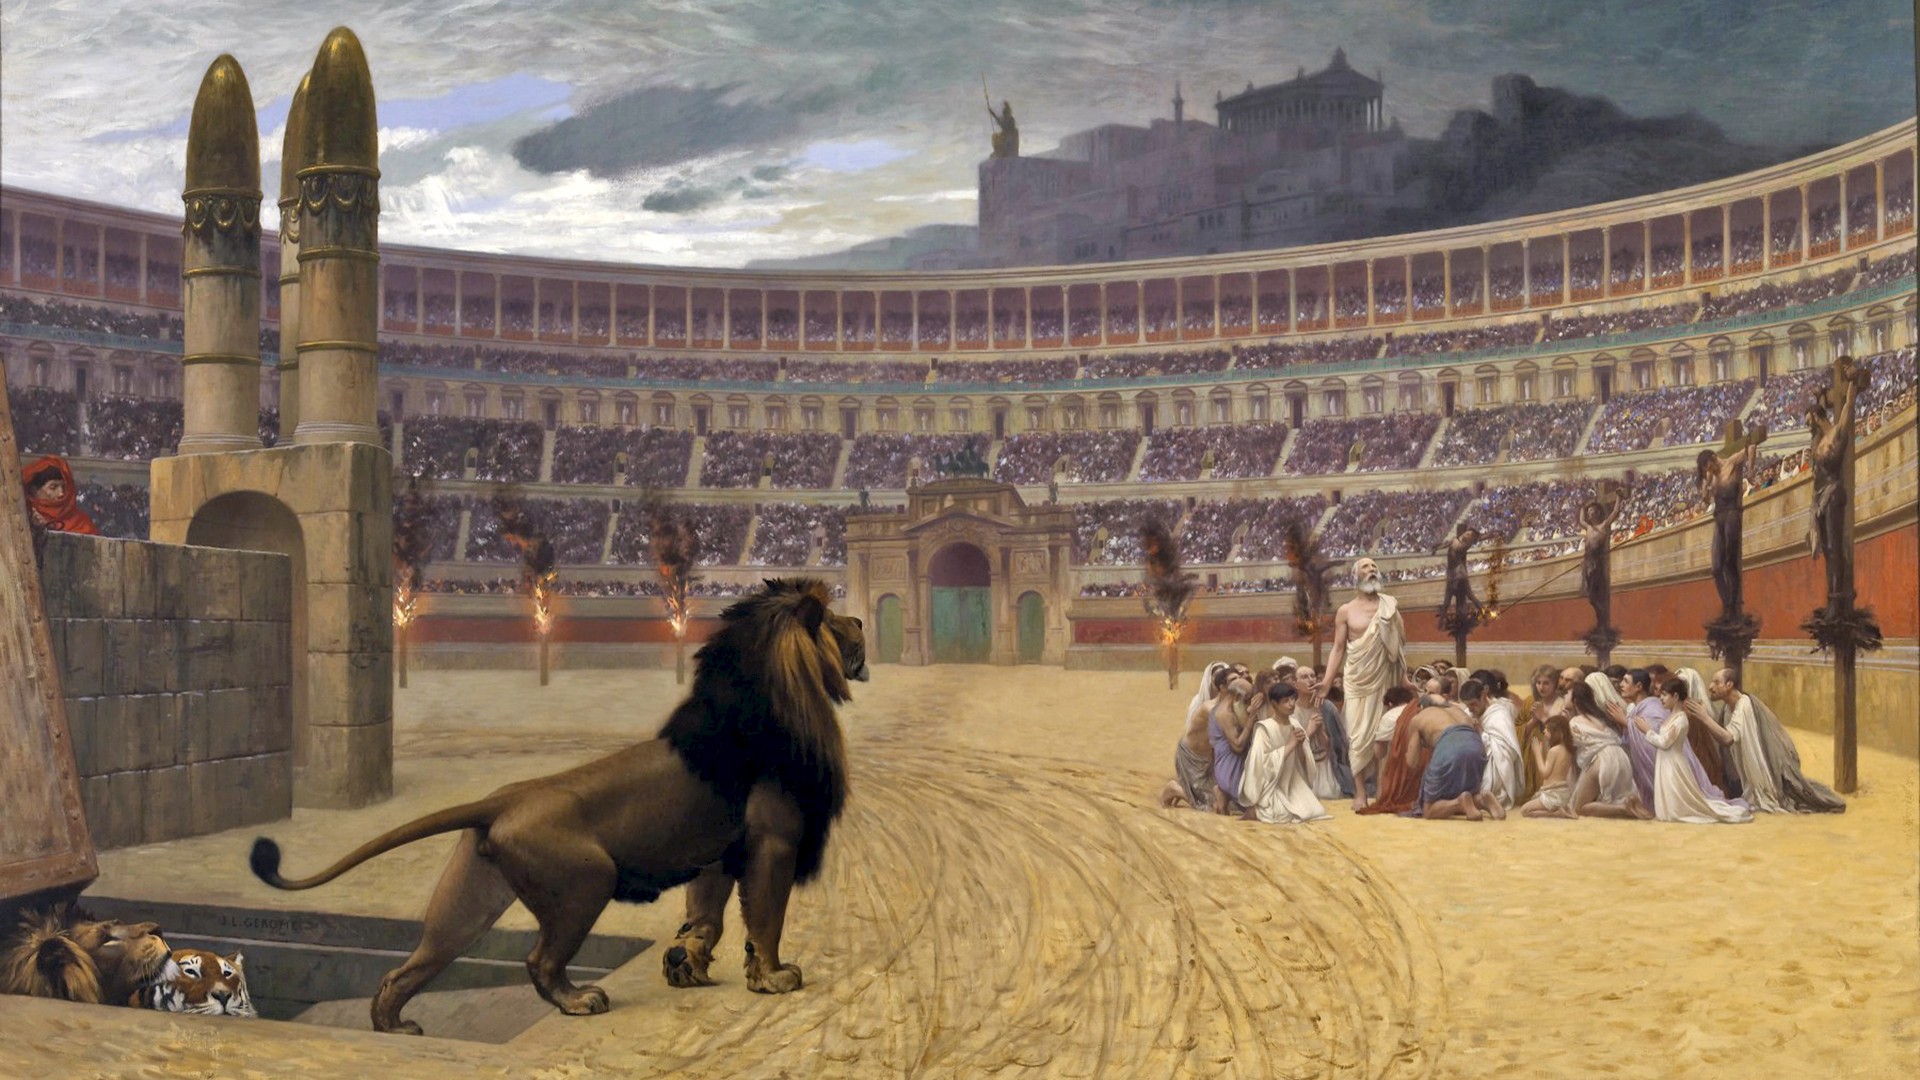 Were Christians fed to the lions?